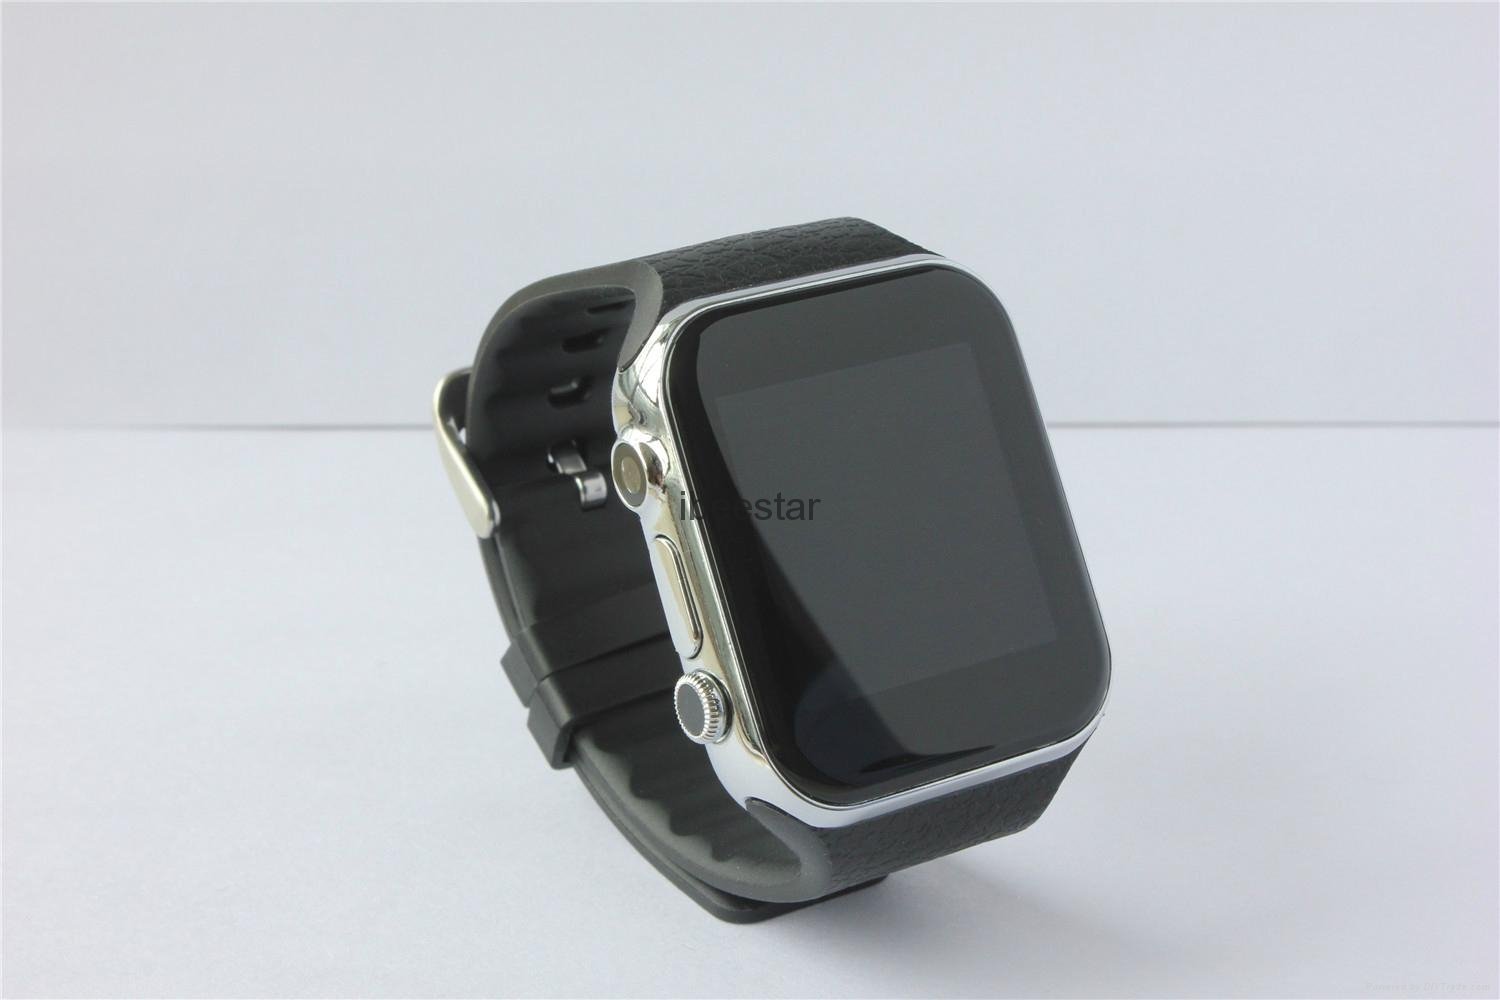 Colorful Smart Watch for Apple iPhone Android Phone 